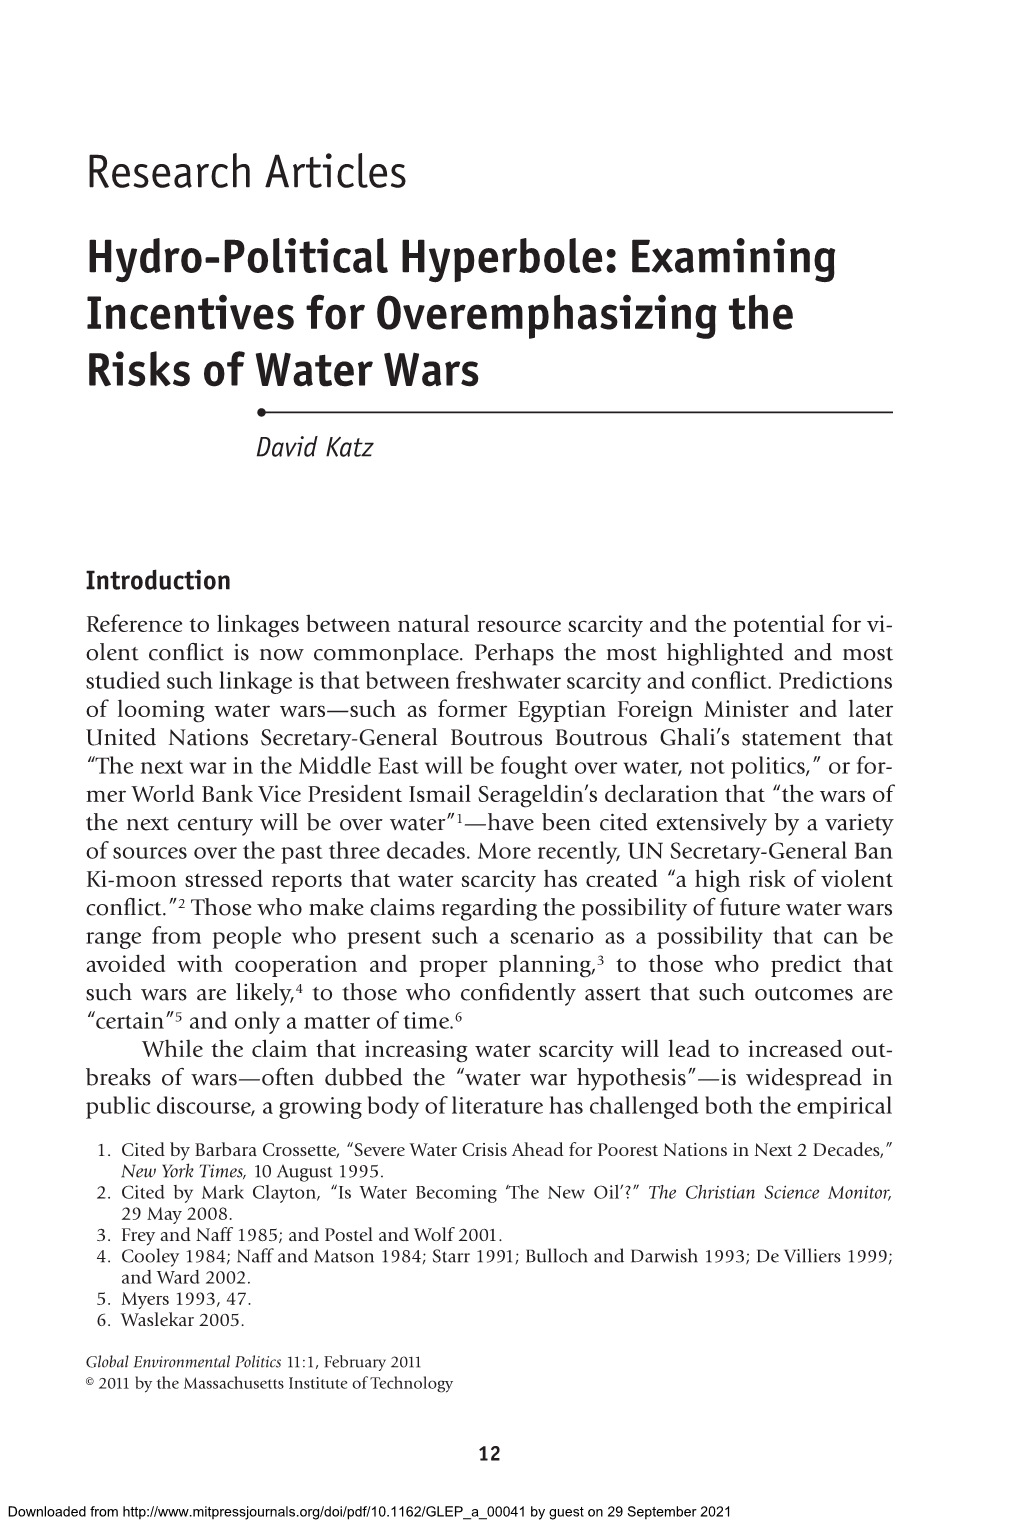 Research Articles Hydro-Political Hyperbole: Examining Incentives for Overemphasizing the Risks of Water Wars • David Katz